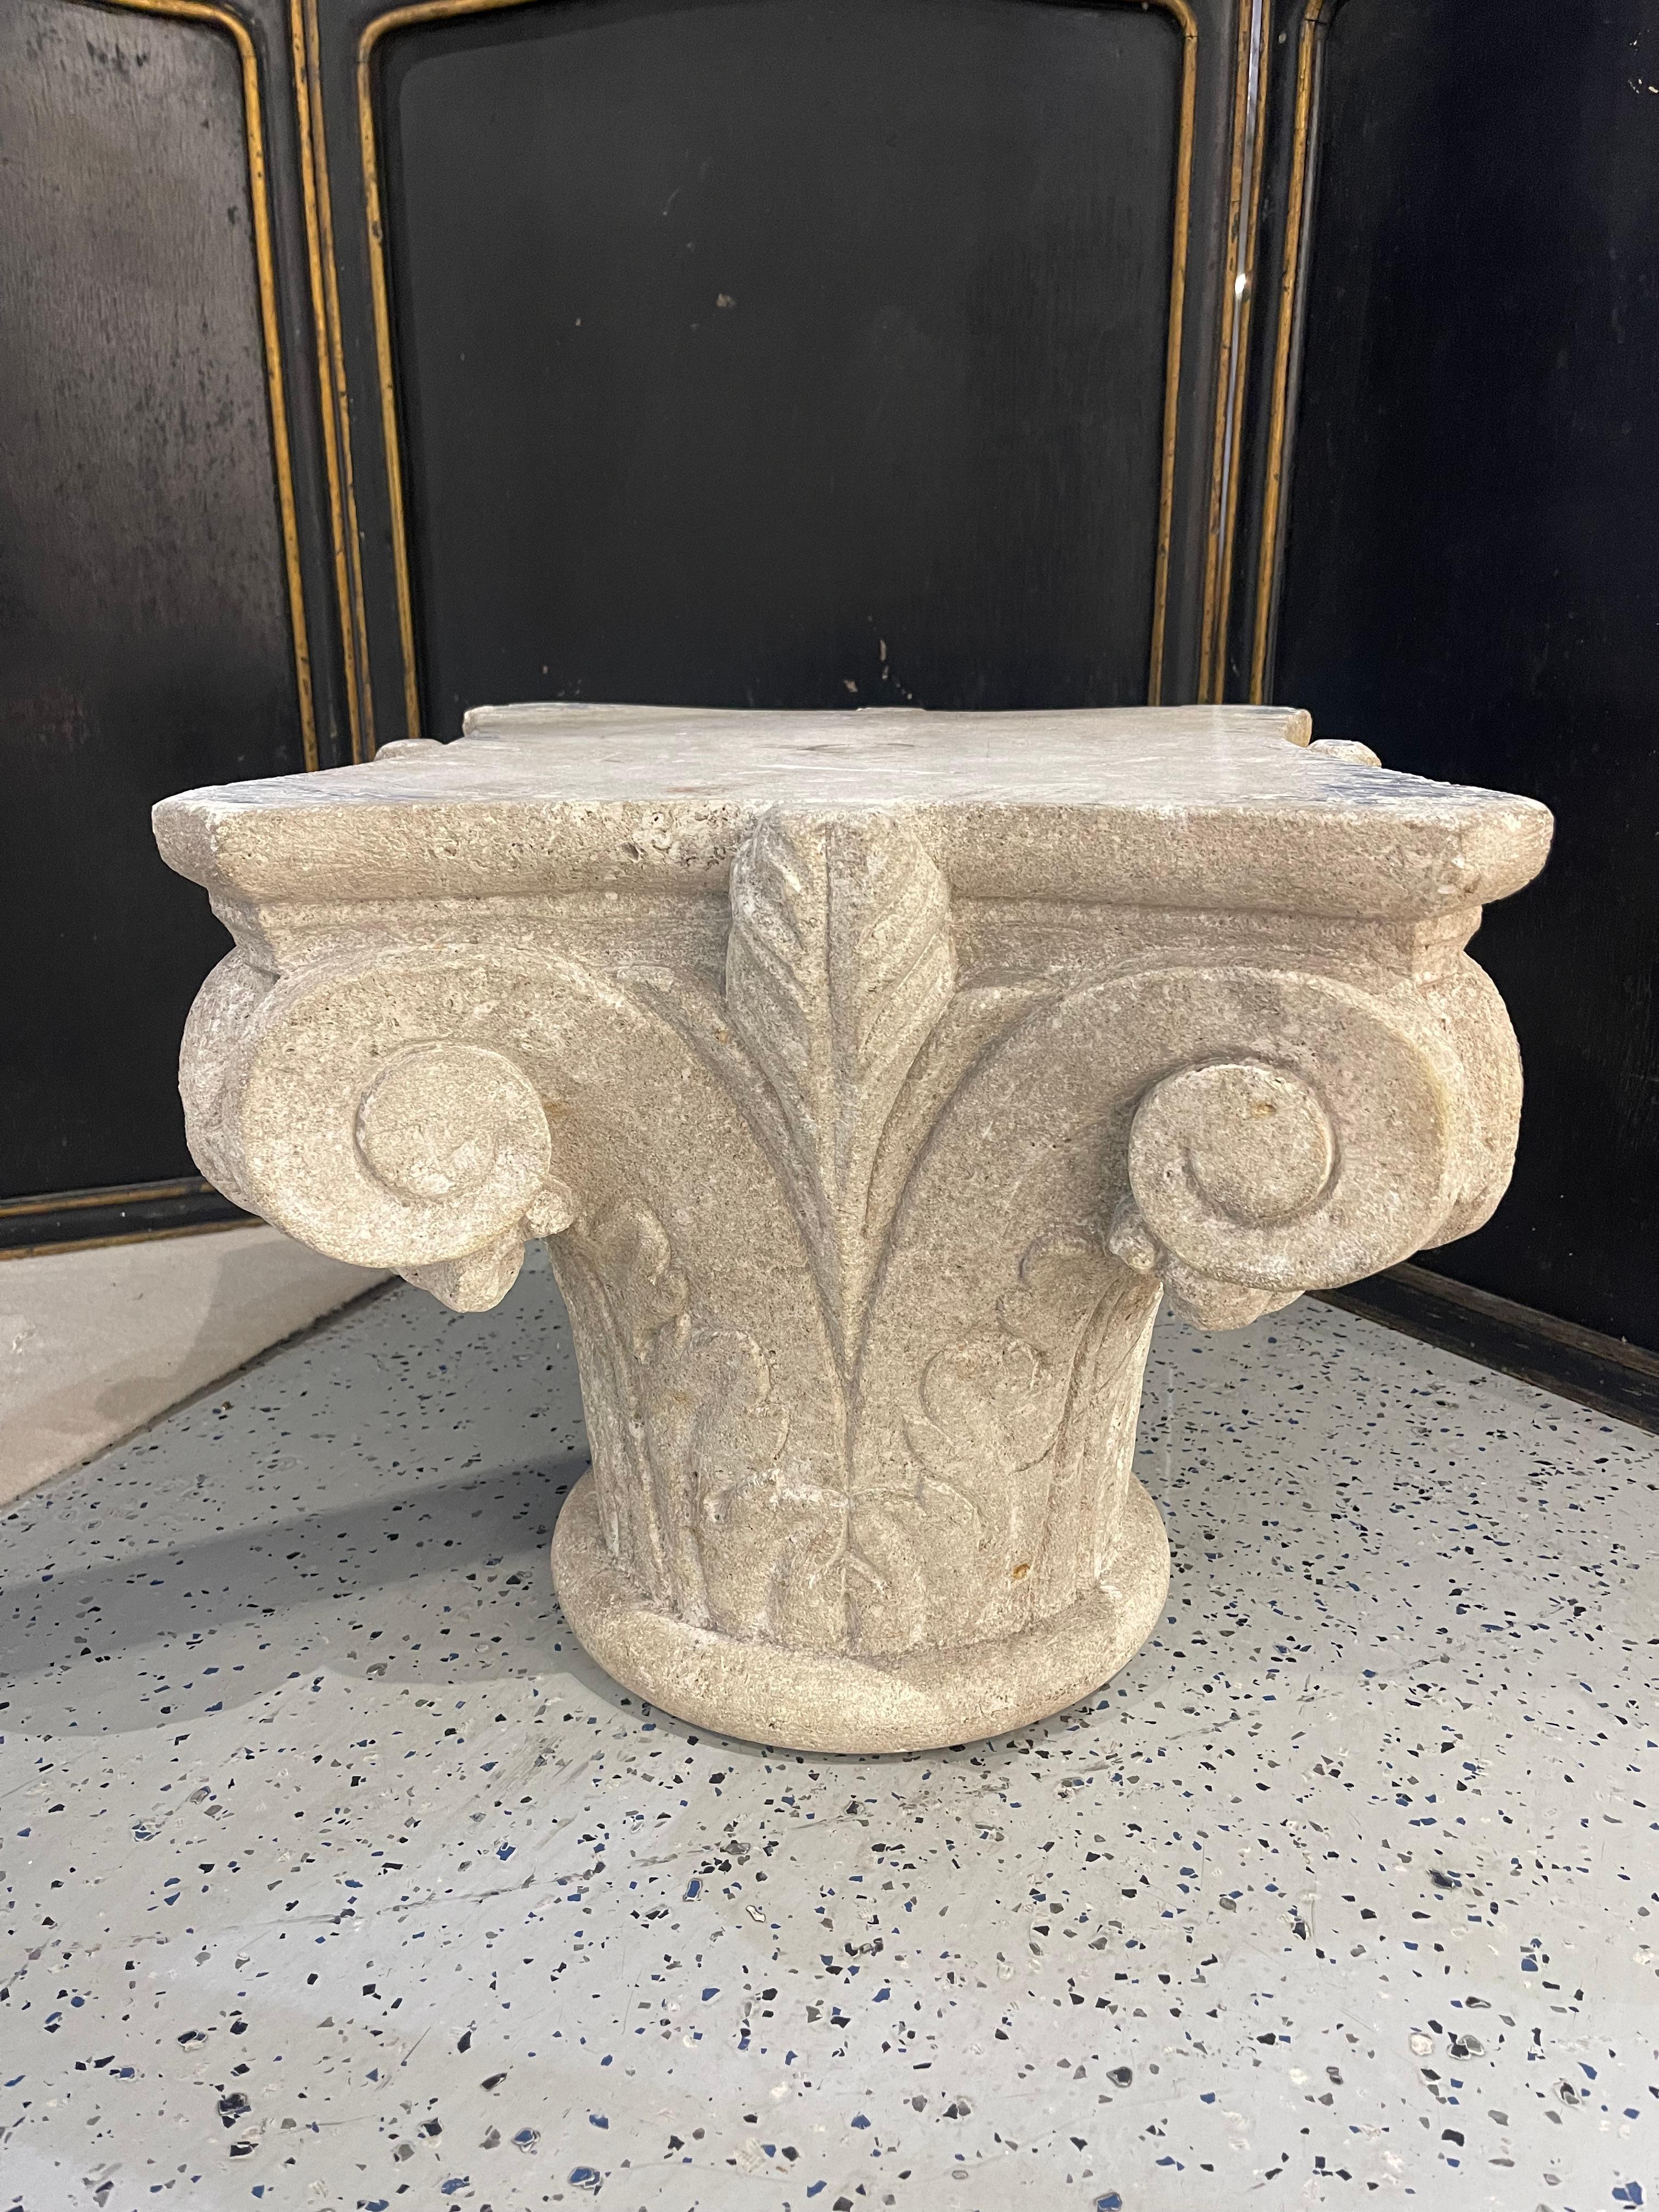 Description

Italian cut stone base 18th century.
This wide-footed white stone sculpture in the form of a Corinthian column The Corinthian frieze is distinguished from the Ionic only because it generally features a greater magnificence of